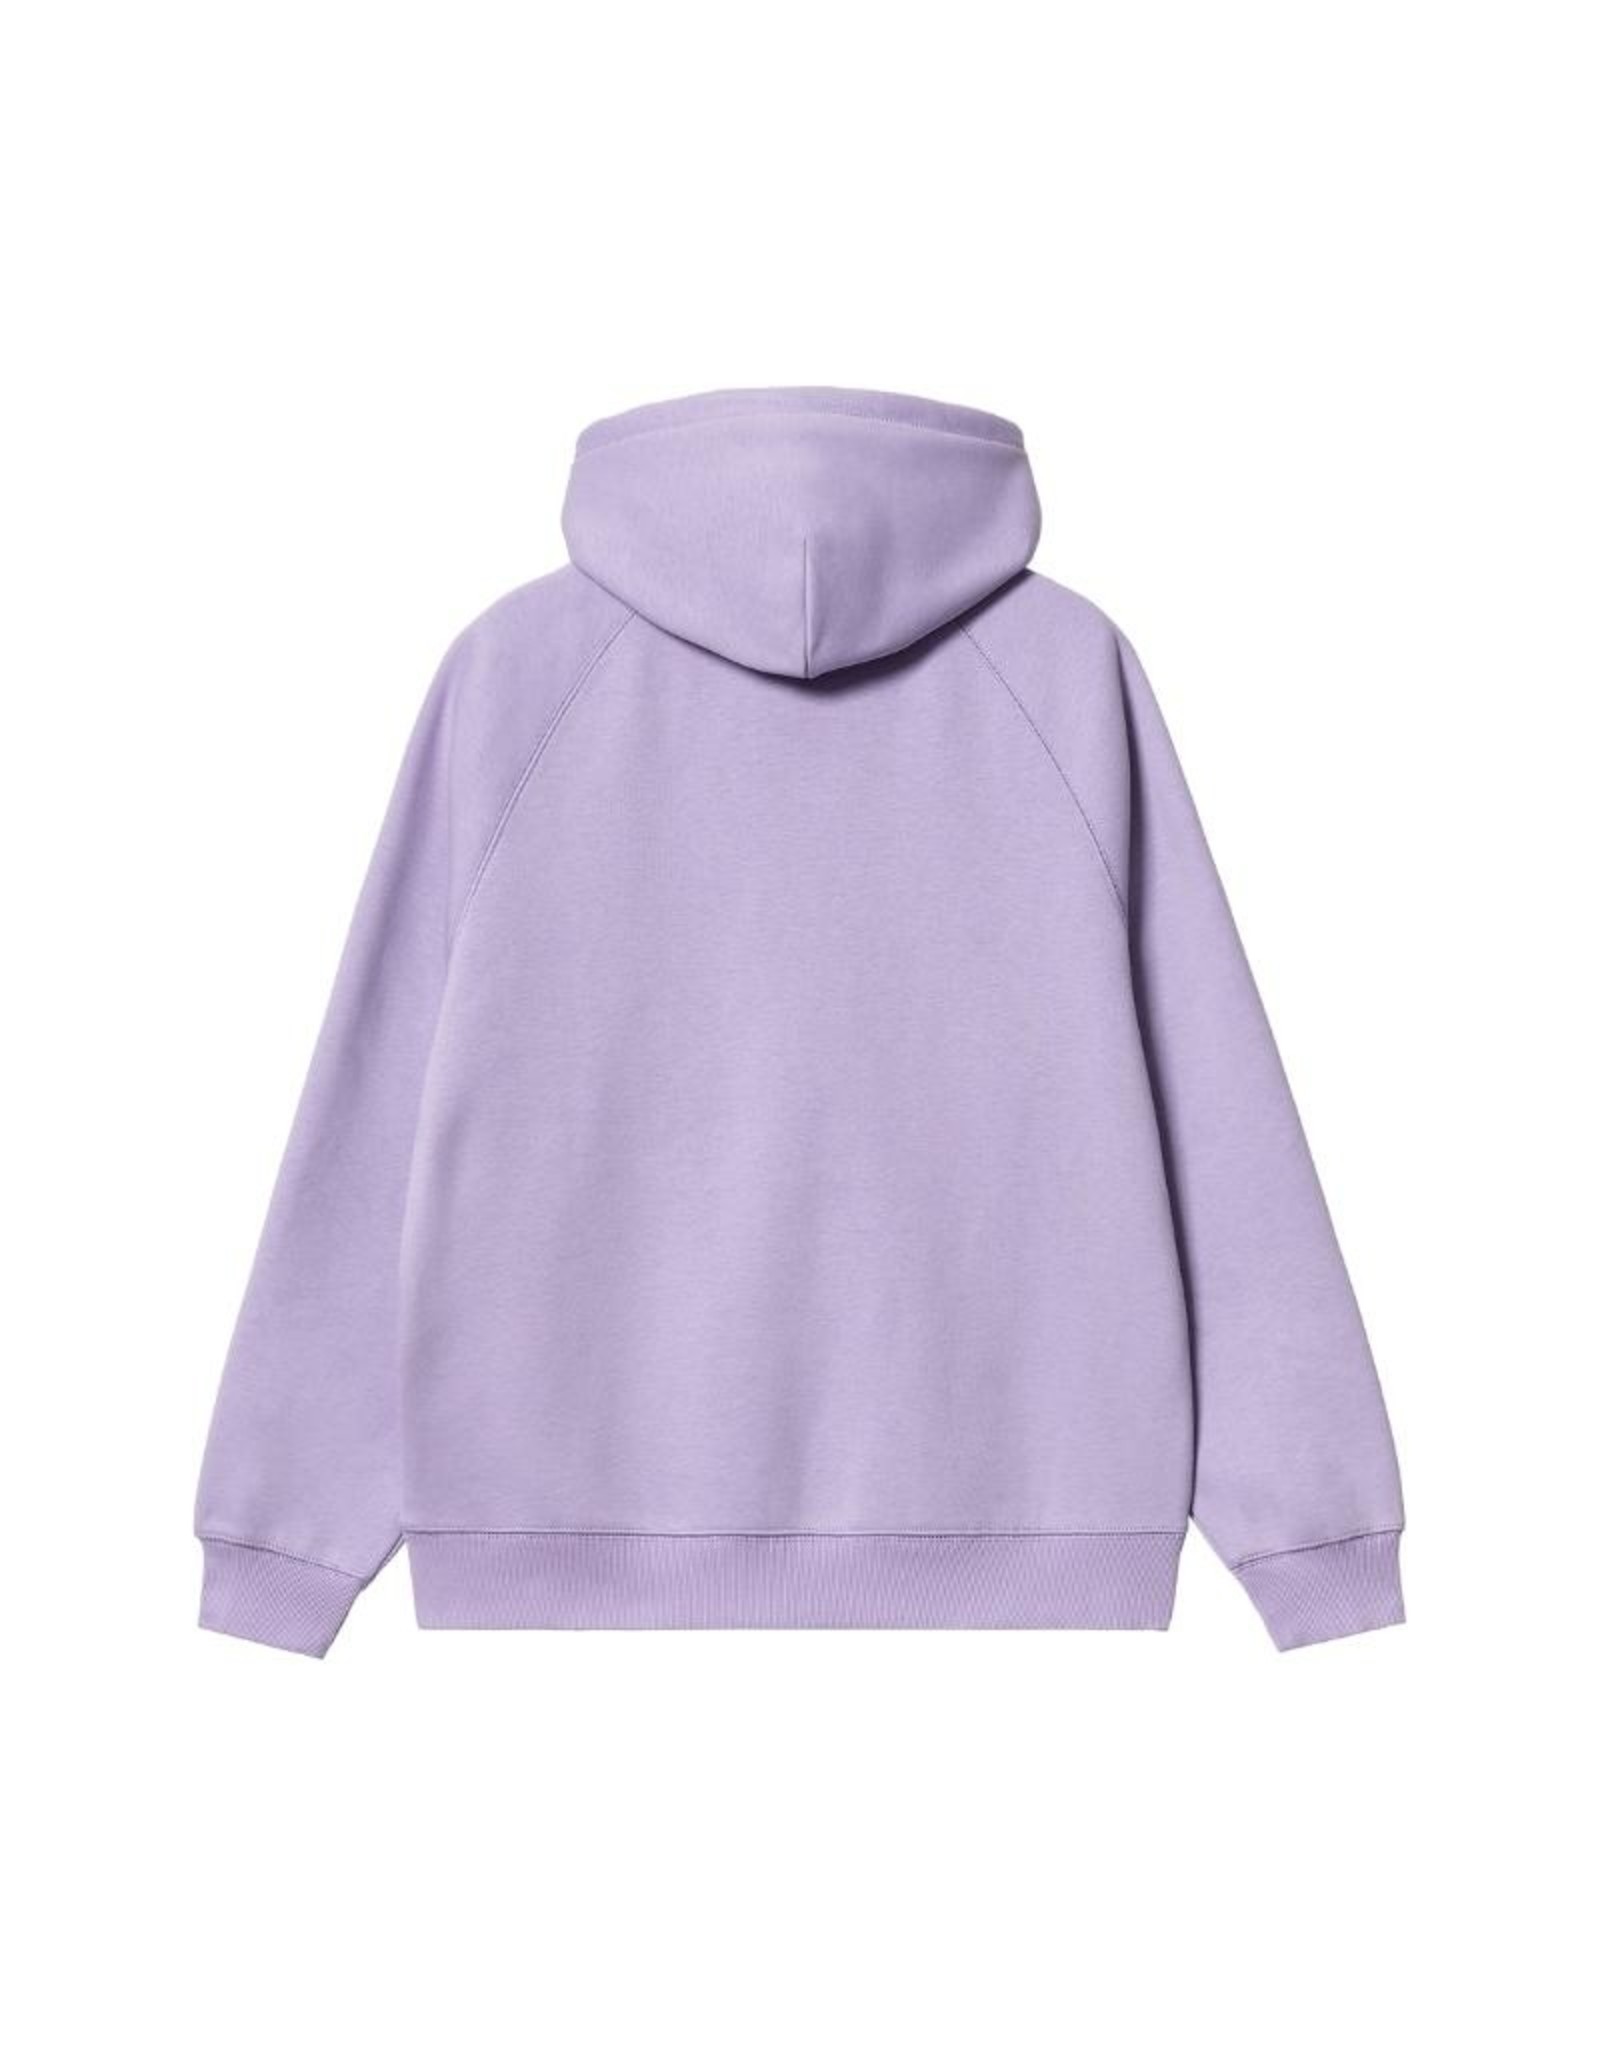 Carhartt - W' HOODED CHASE SWEAT